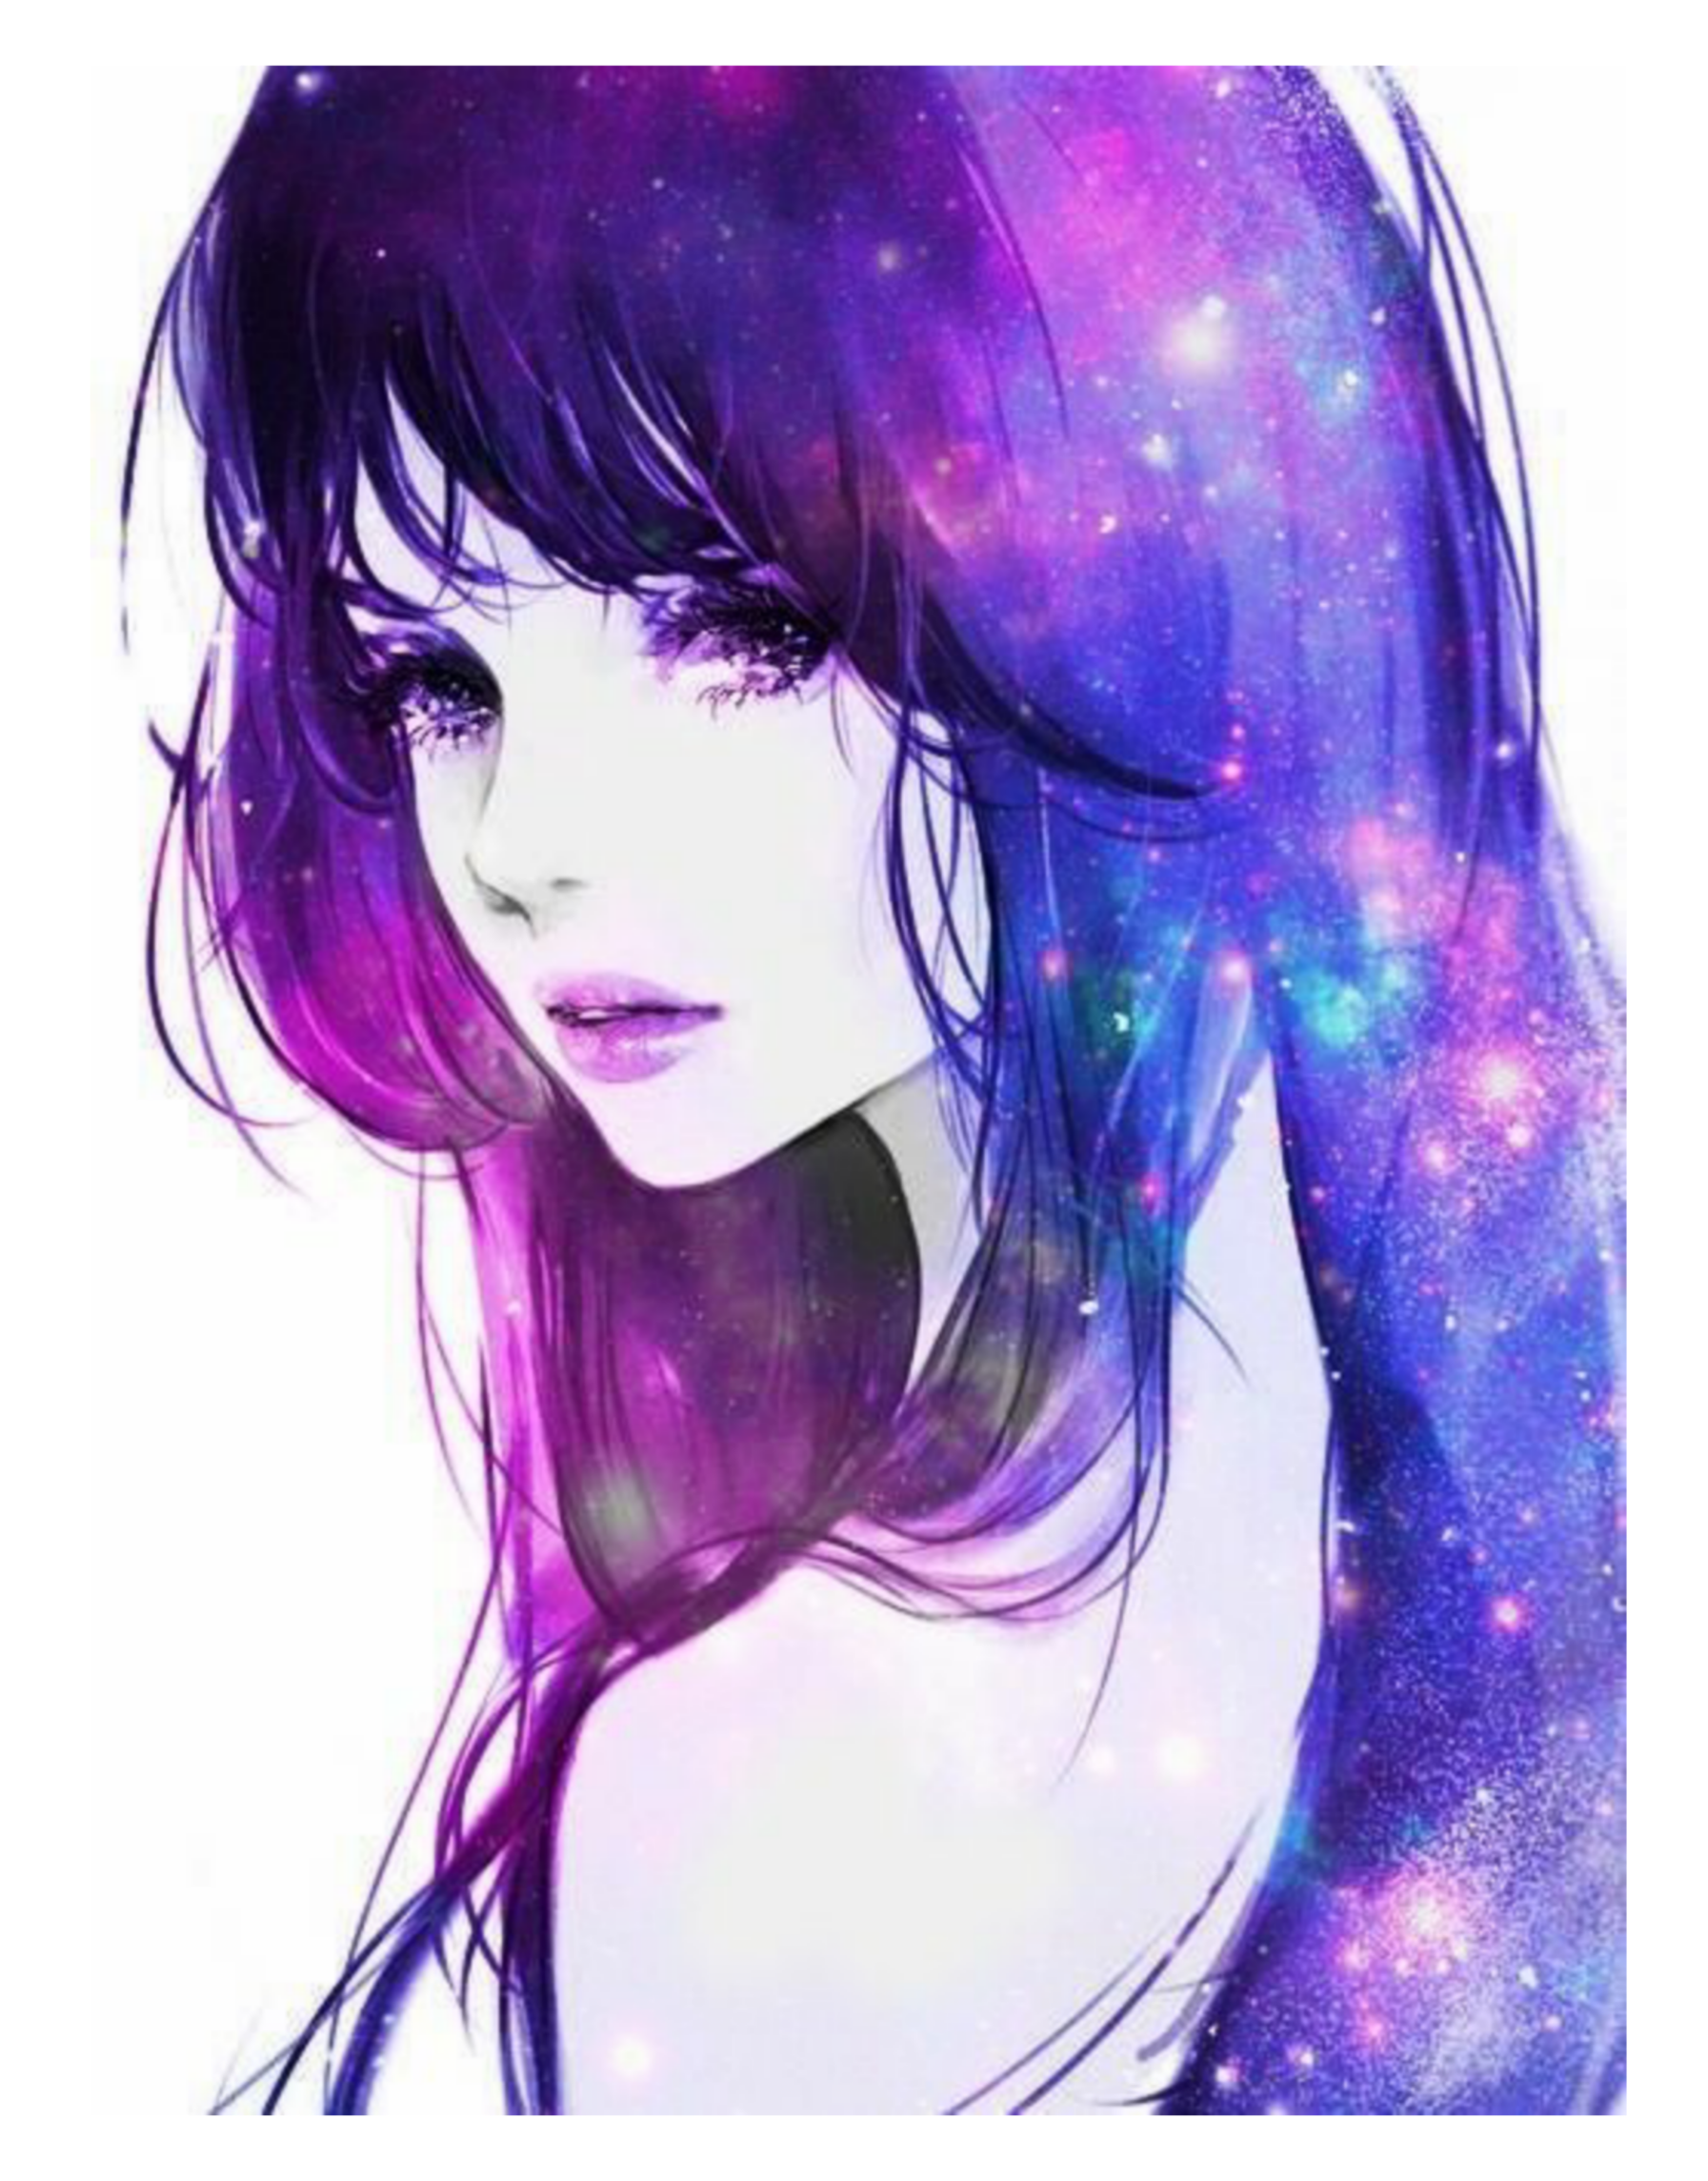 This visual is about galactic girl galaxyhair art drawing freetoedit #galac...